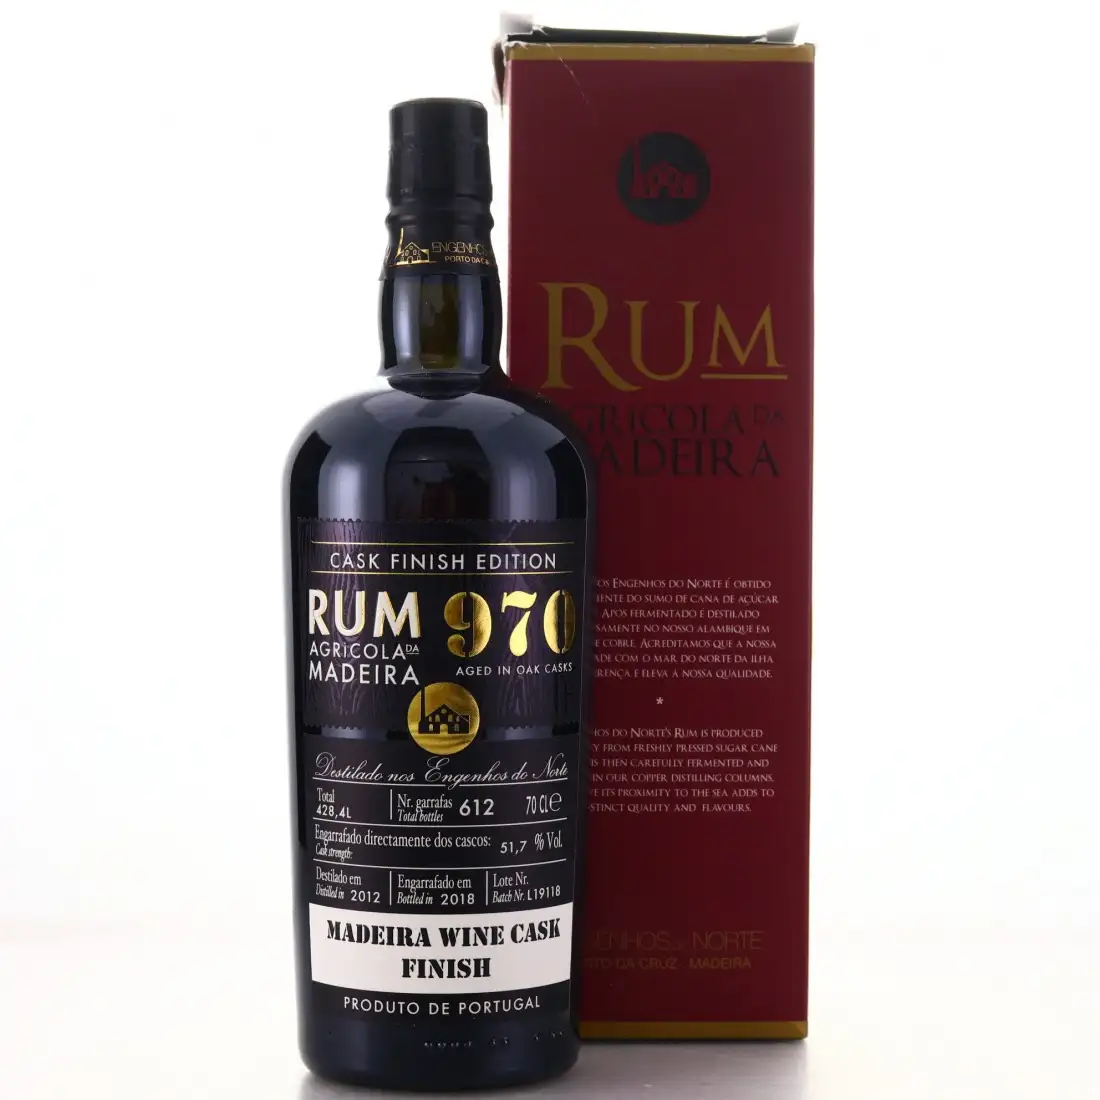 Image of the front of the bottle of the rum 970 Black Label Cask Finish Edition